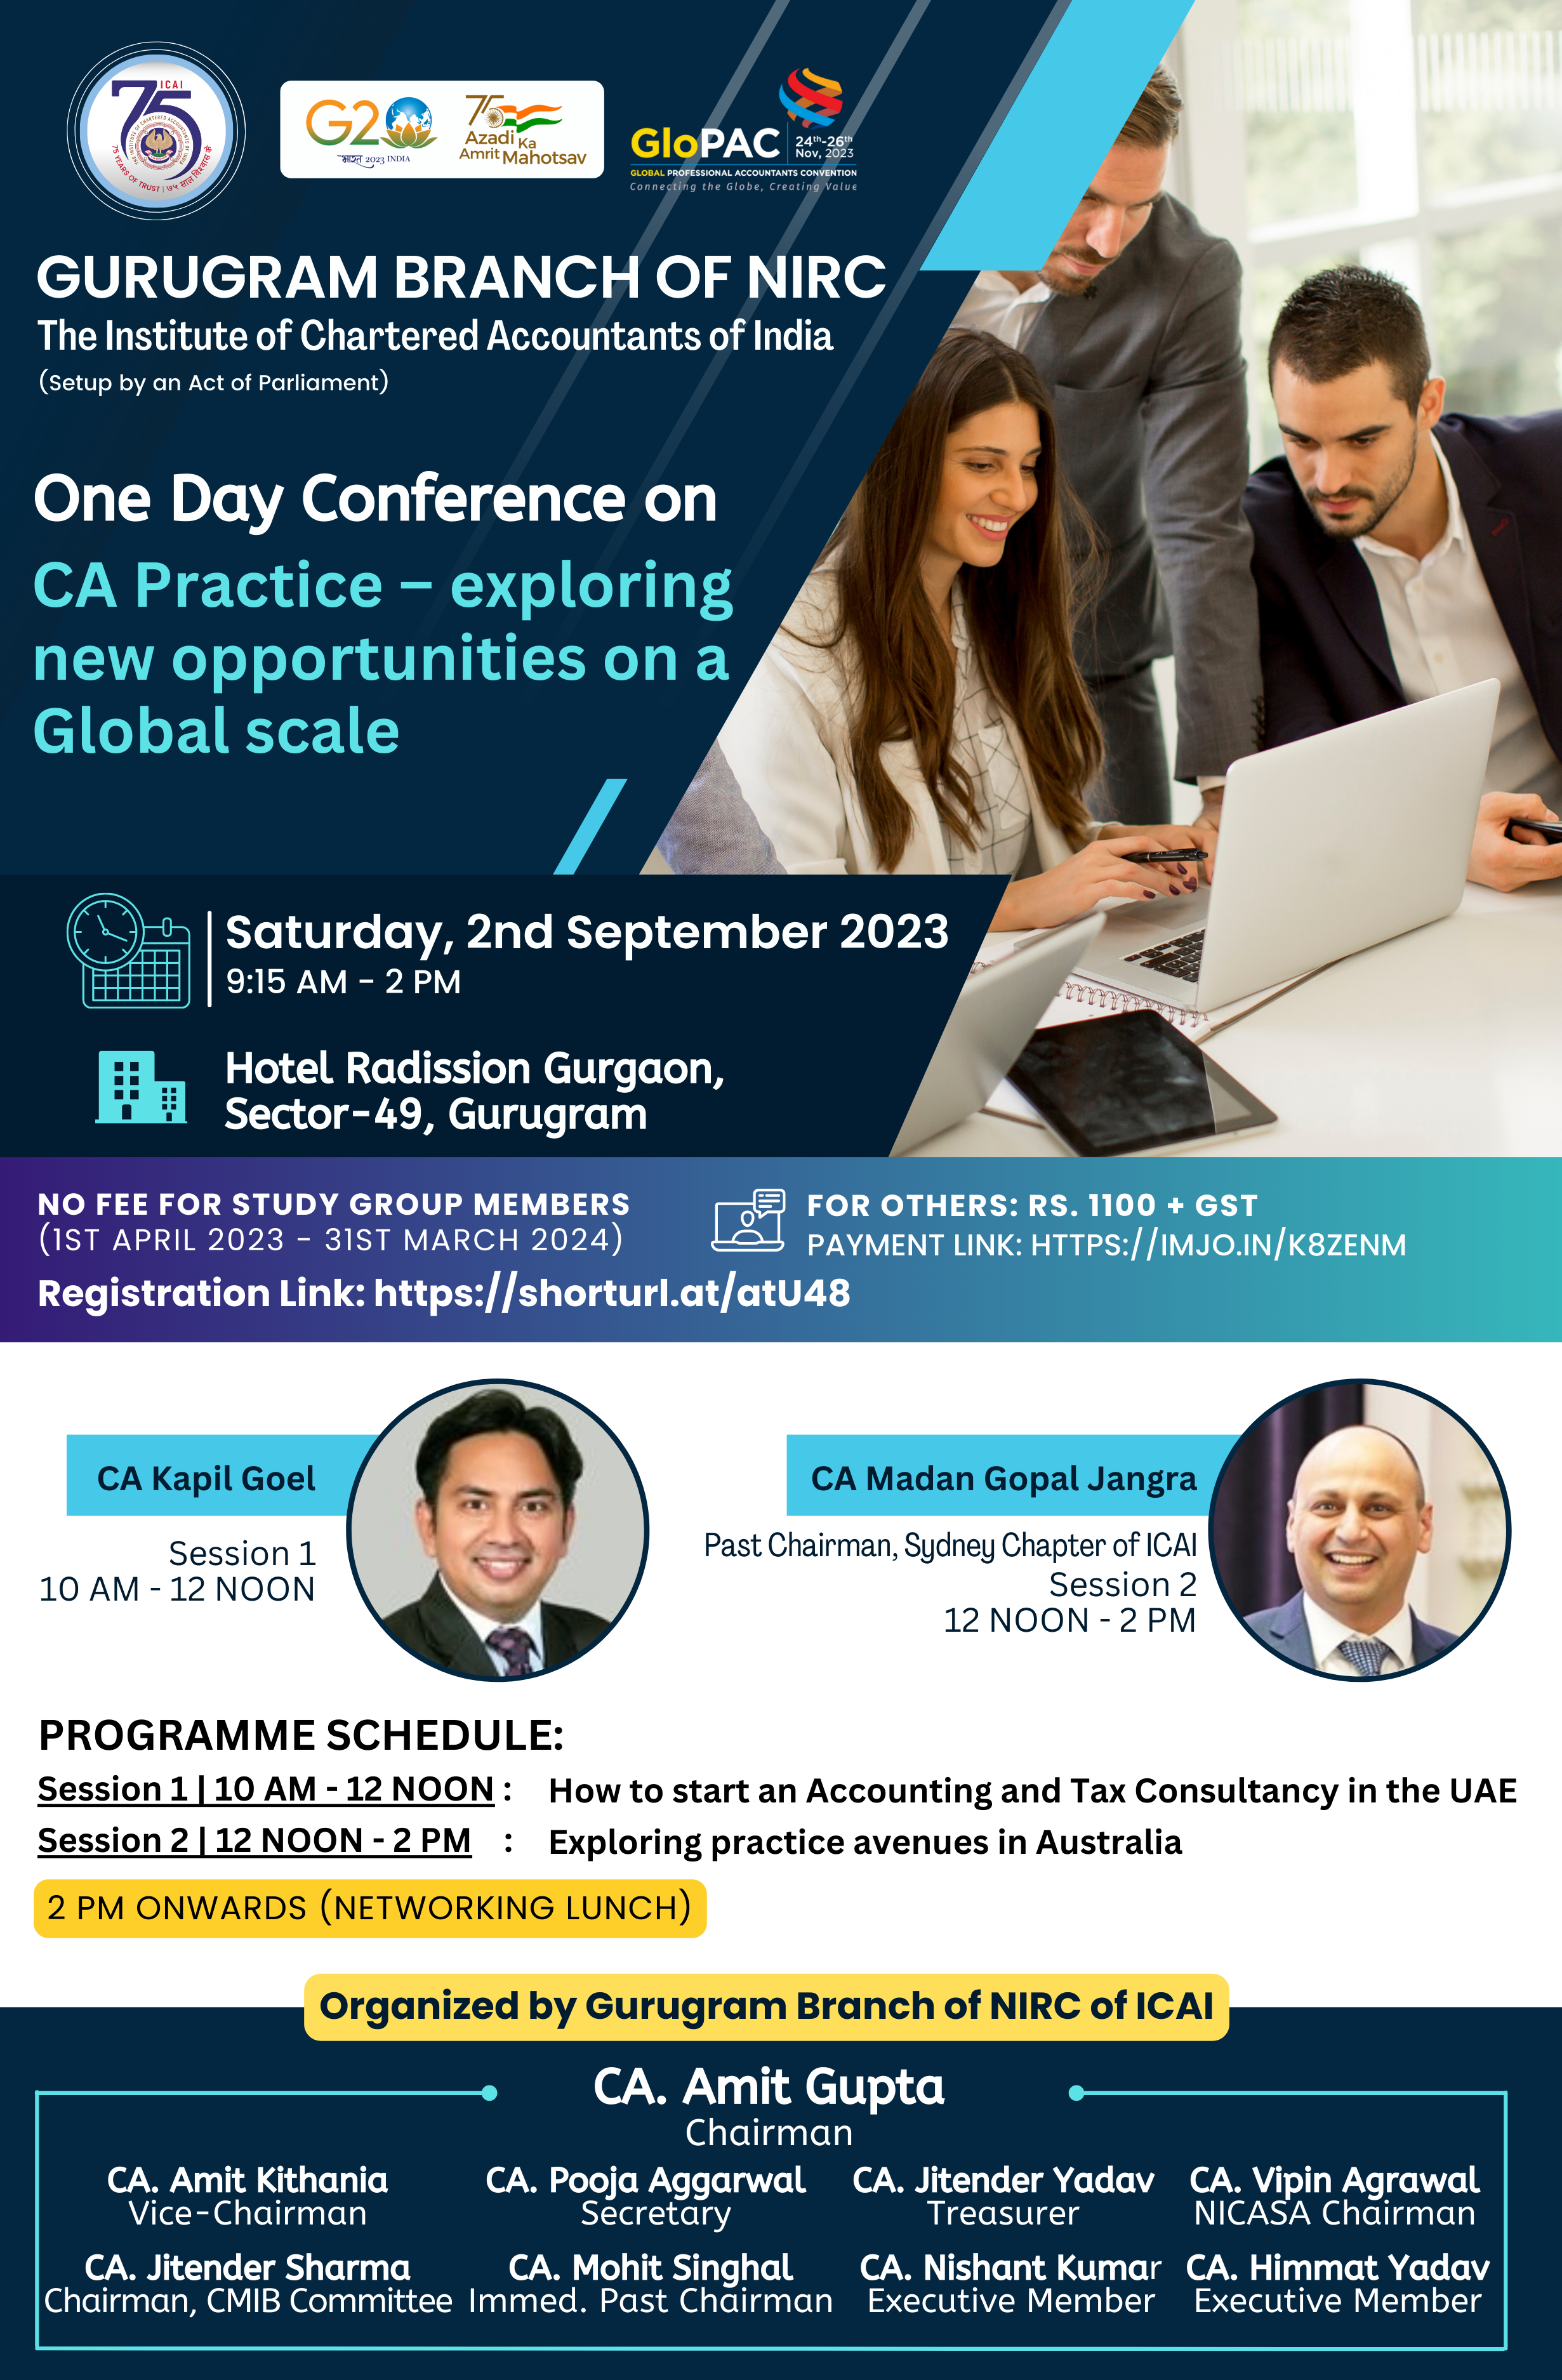 One Day Conference on CA Practice – exploring new opportunities on a Global scale